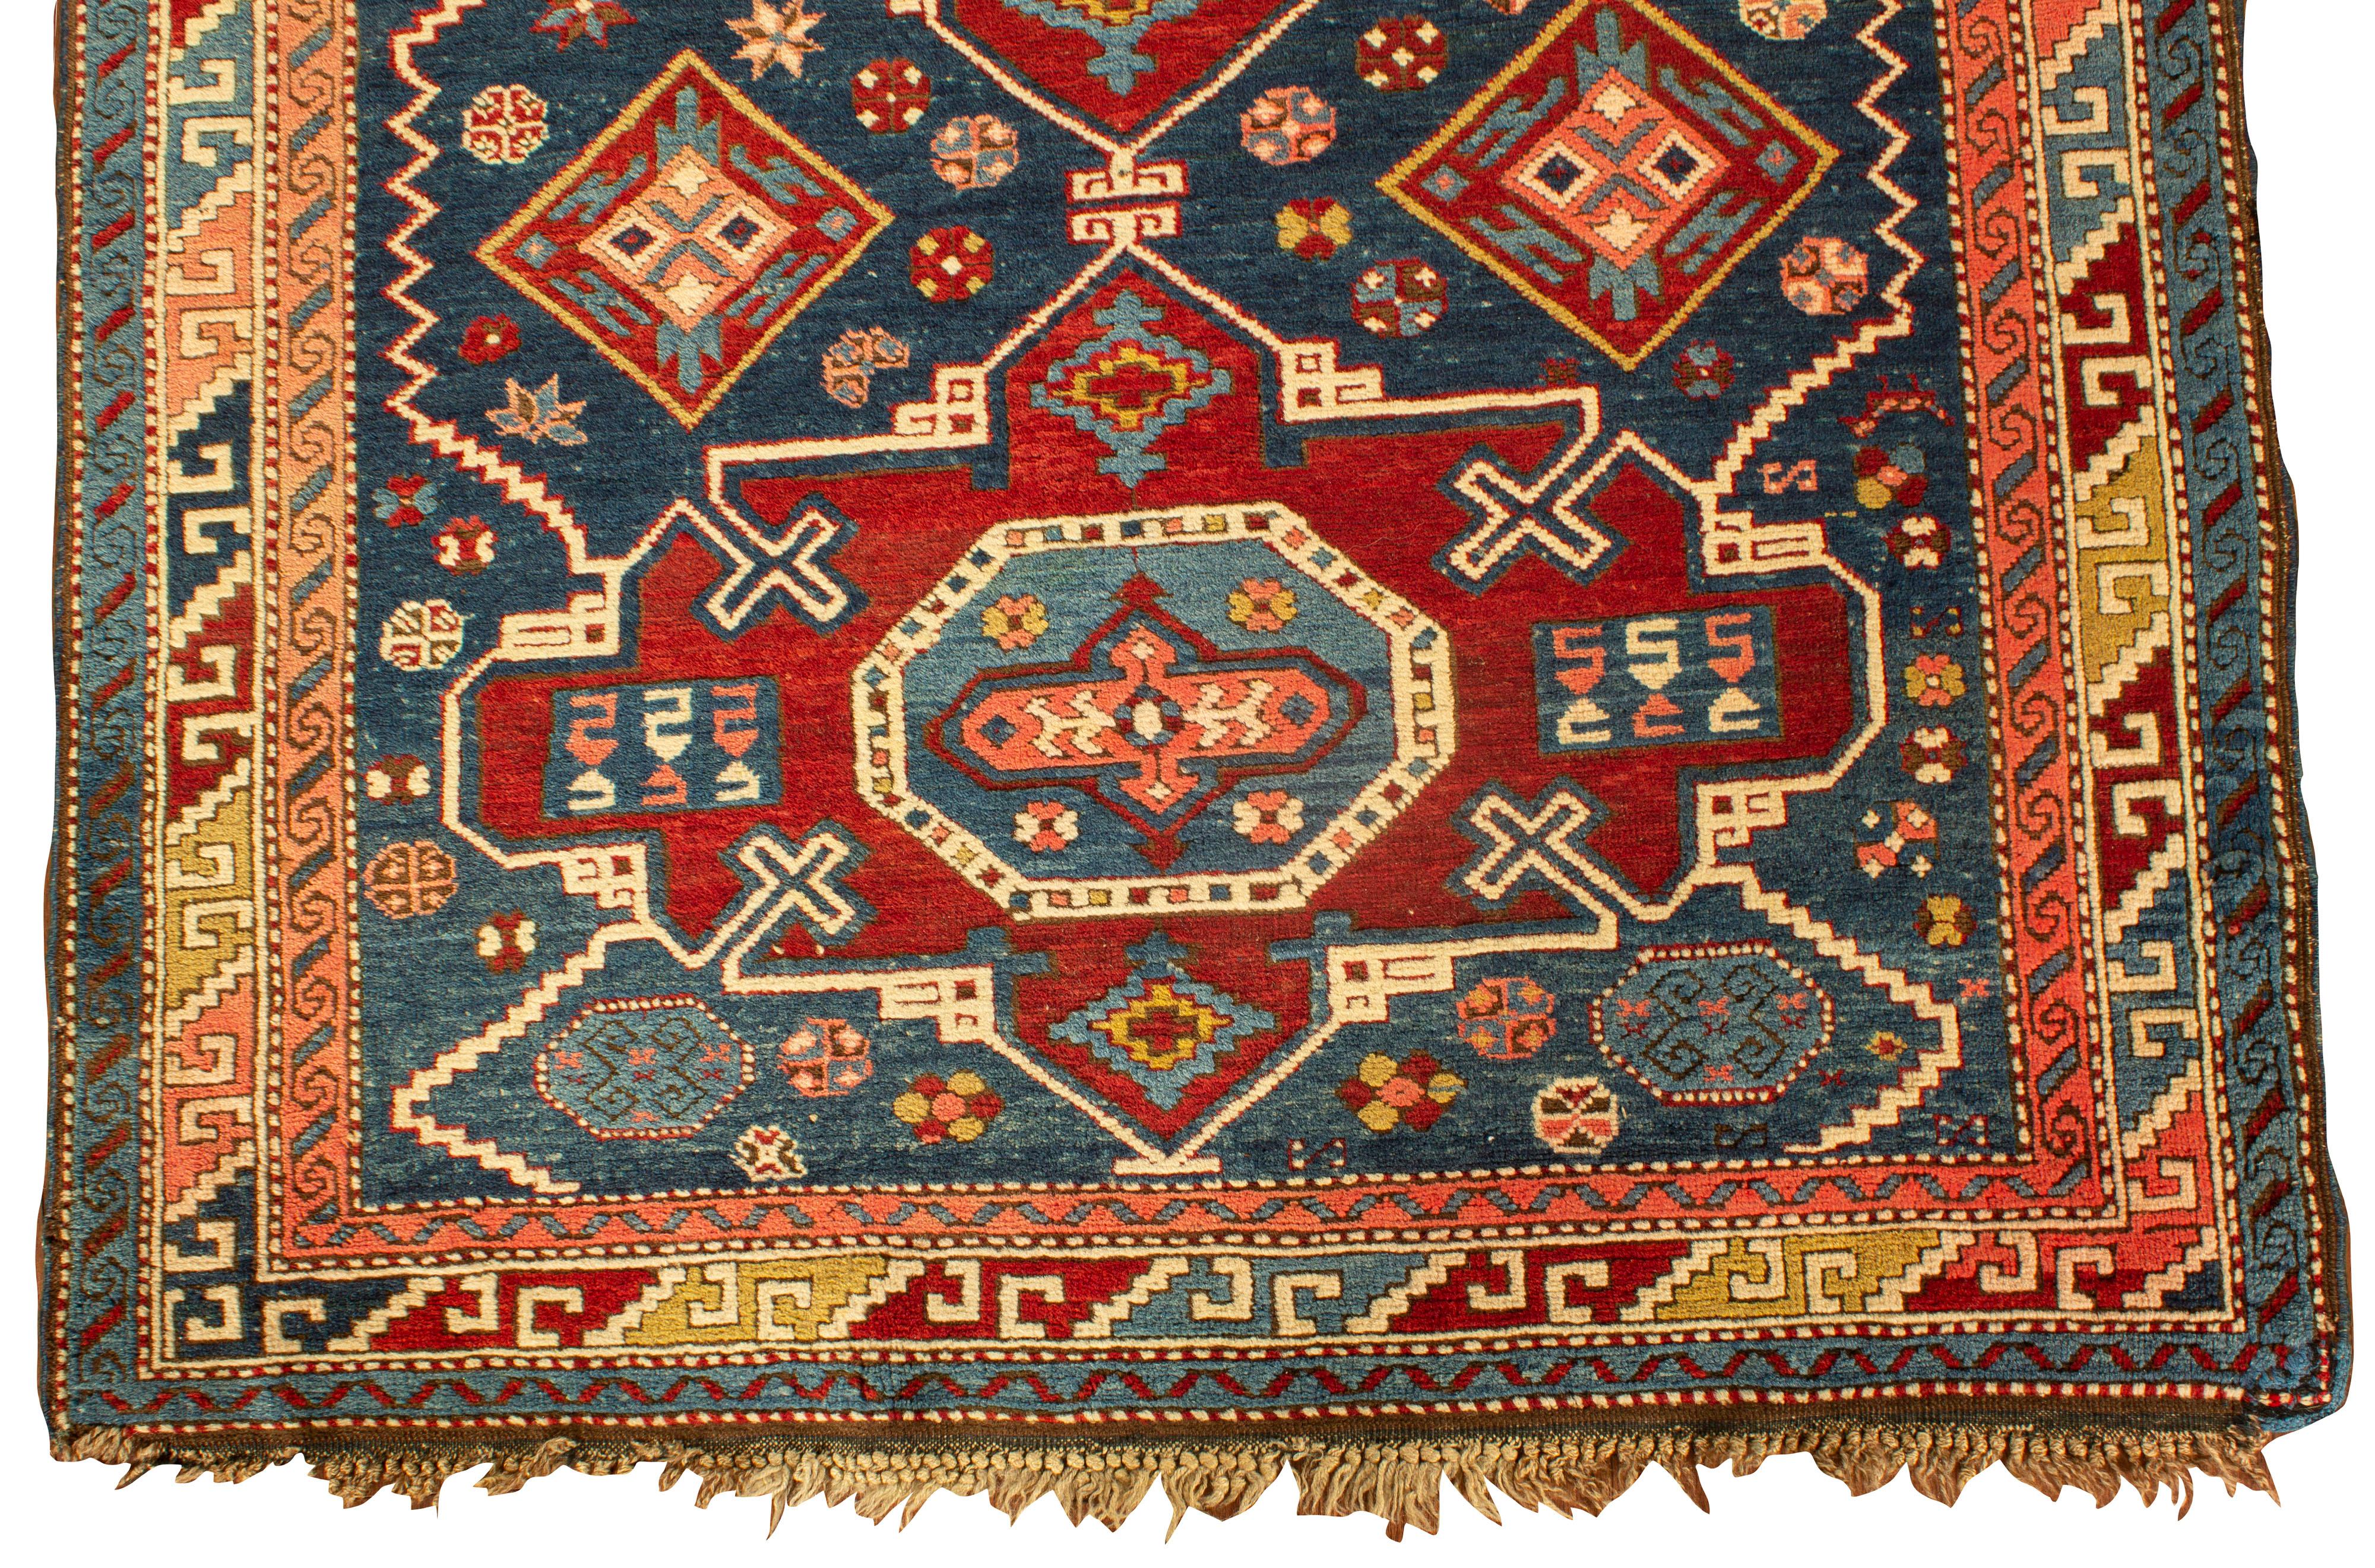 An antique circa 1890 Caucasian Dagestan rug, Dagestan is located inside Russia in the North of Caucasia, up until the 19th century it fell under the control of Persia, so the Persian influence can be seen in the weavings although they are of course